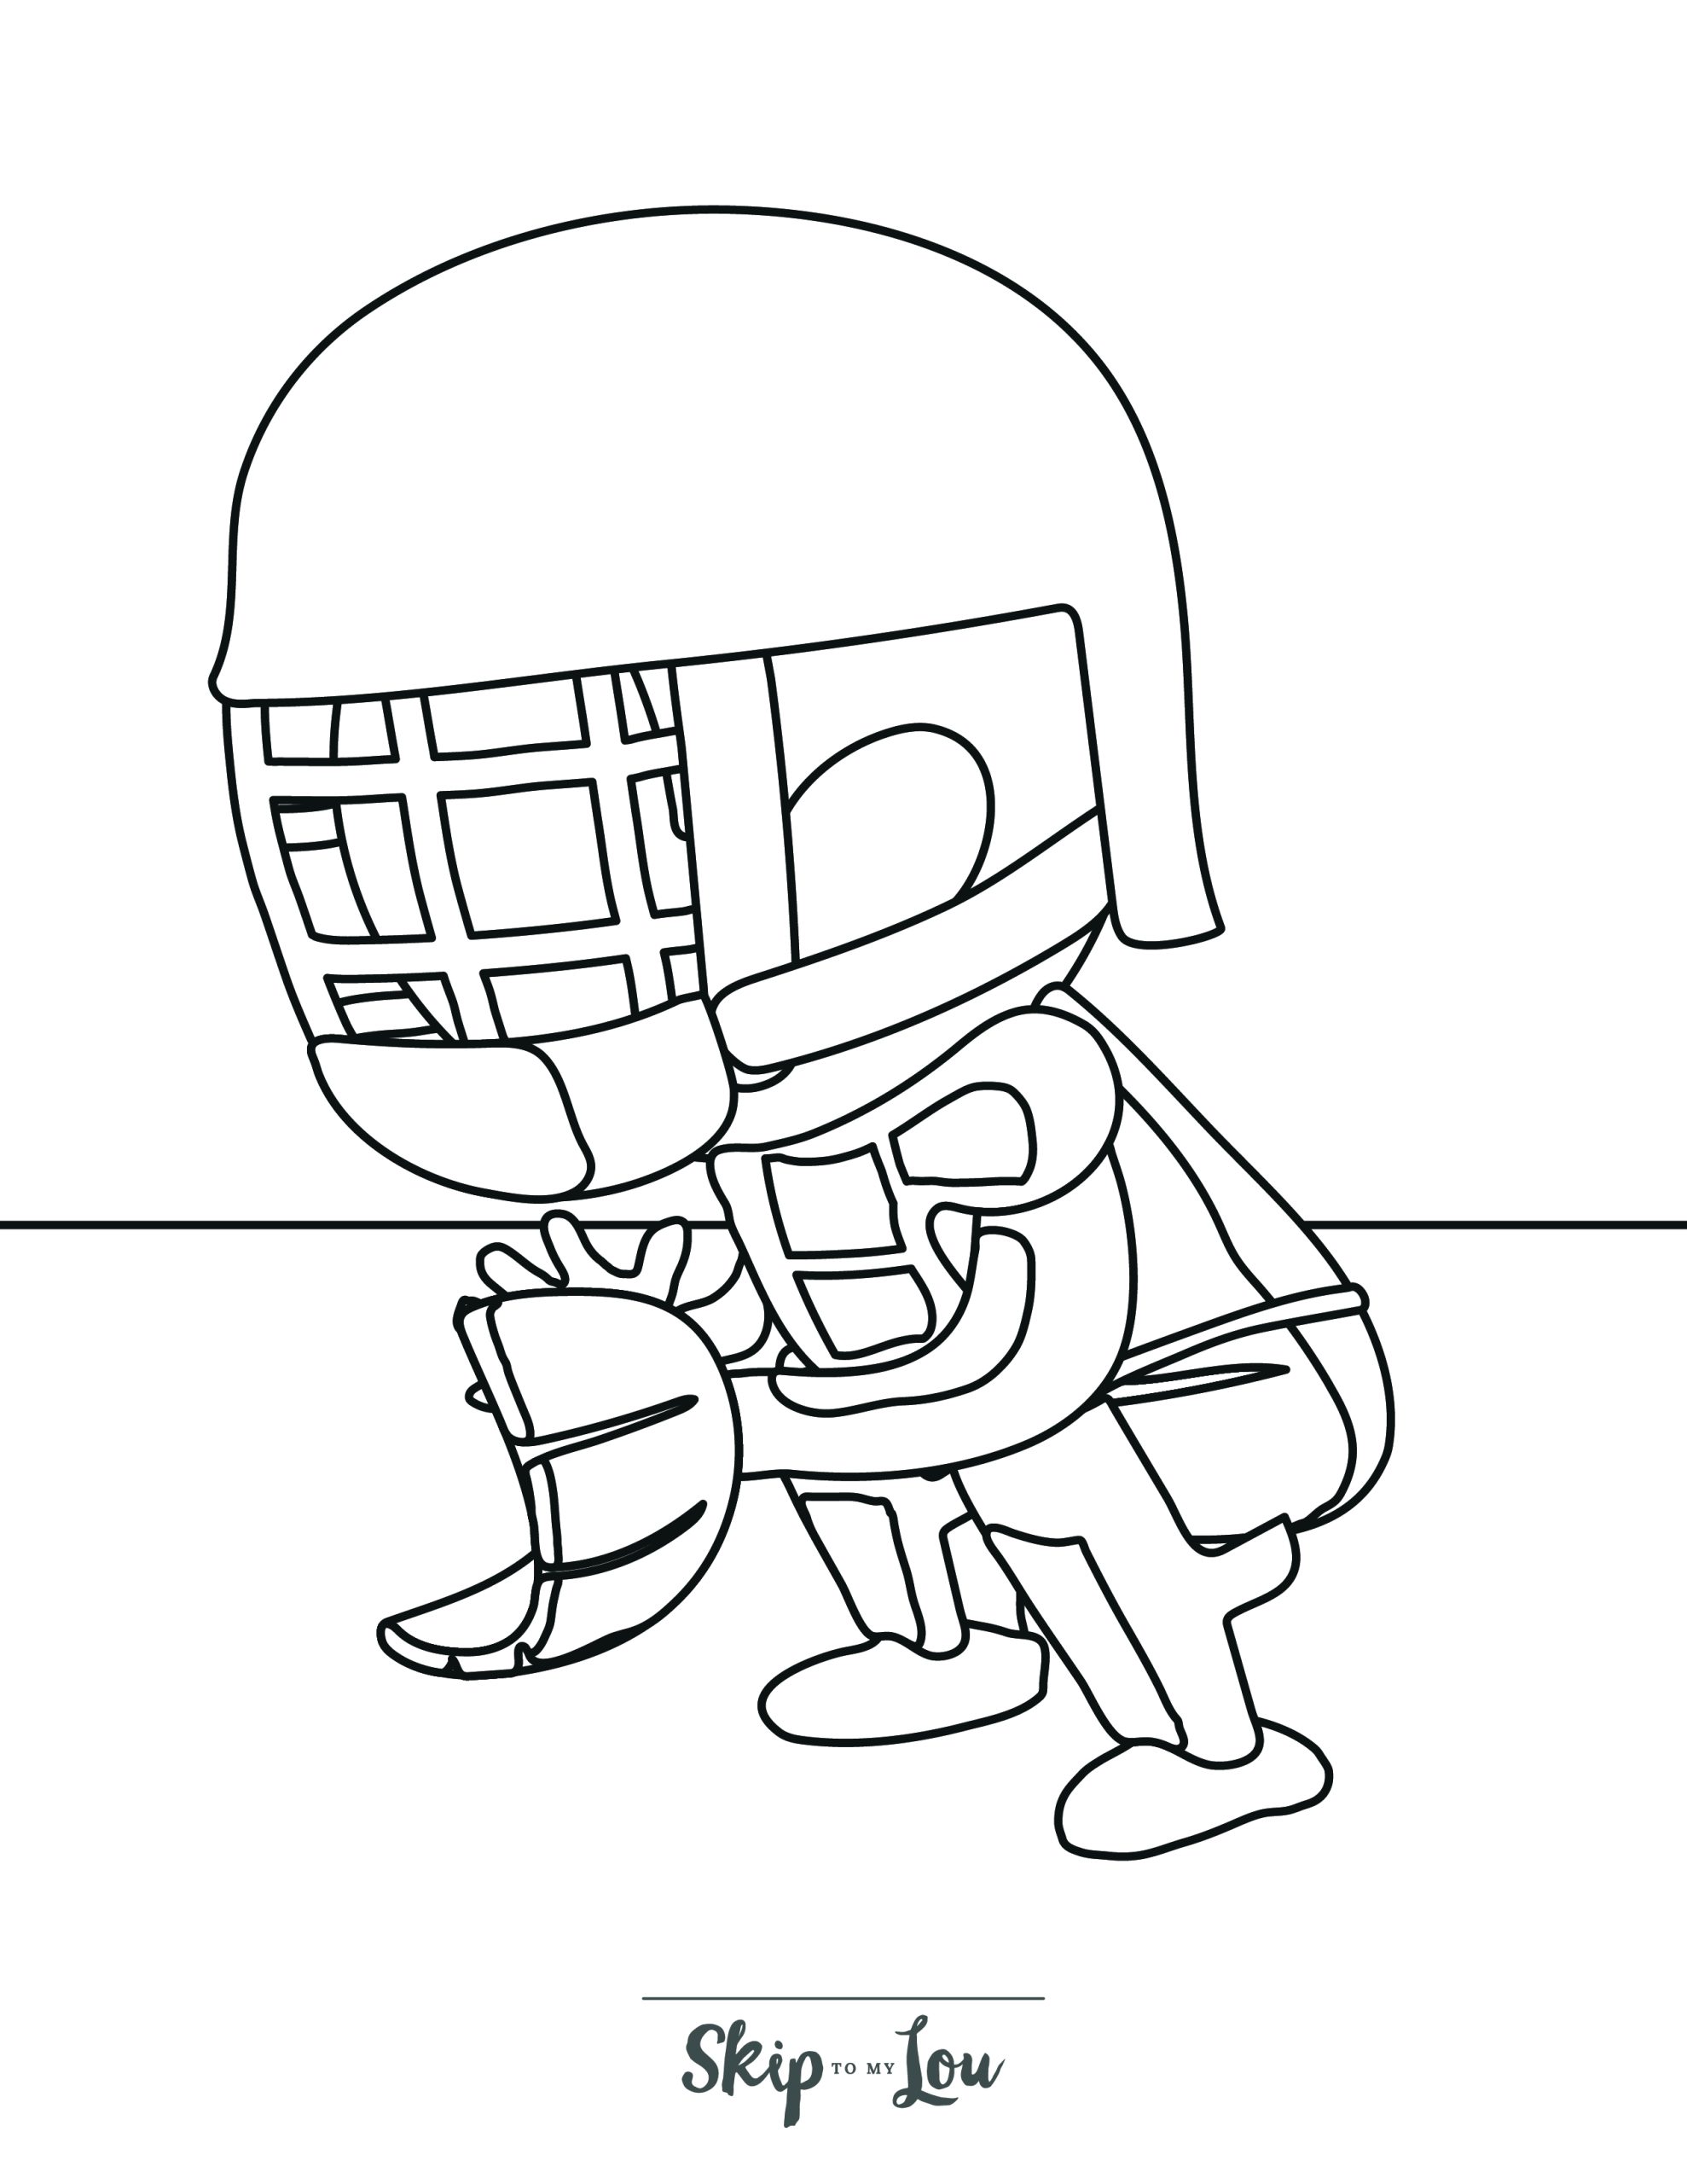 Baseball Coloring Page 4 - A line drawing of a baseball catcher ready to catch the ball. 